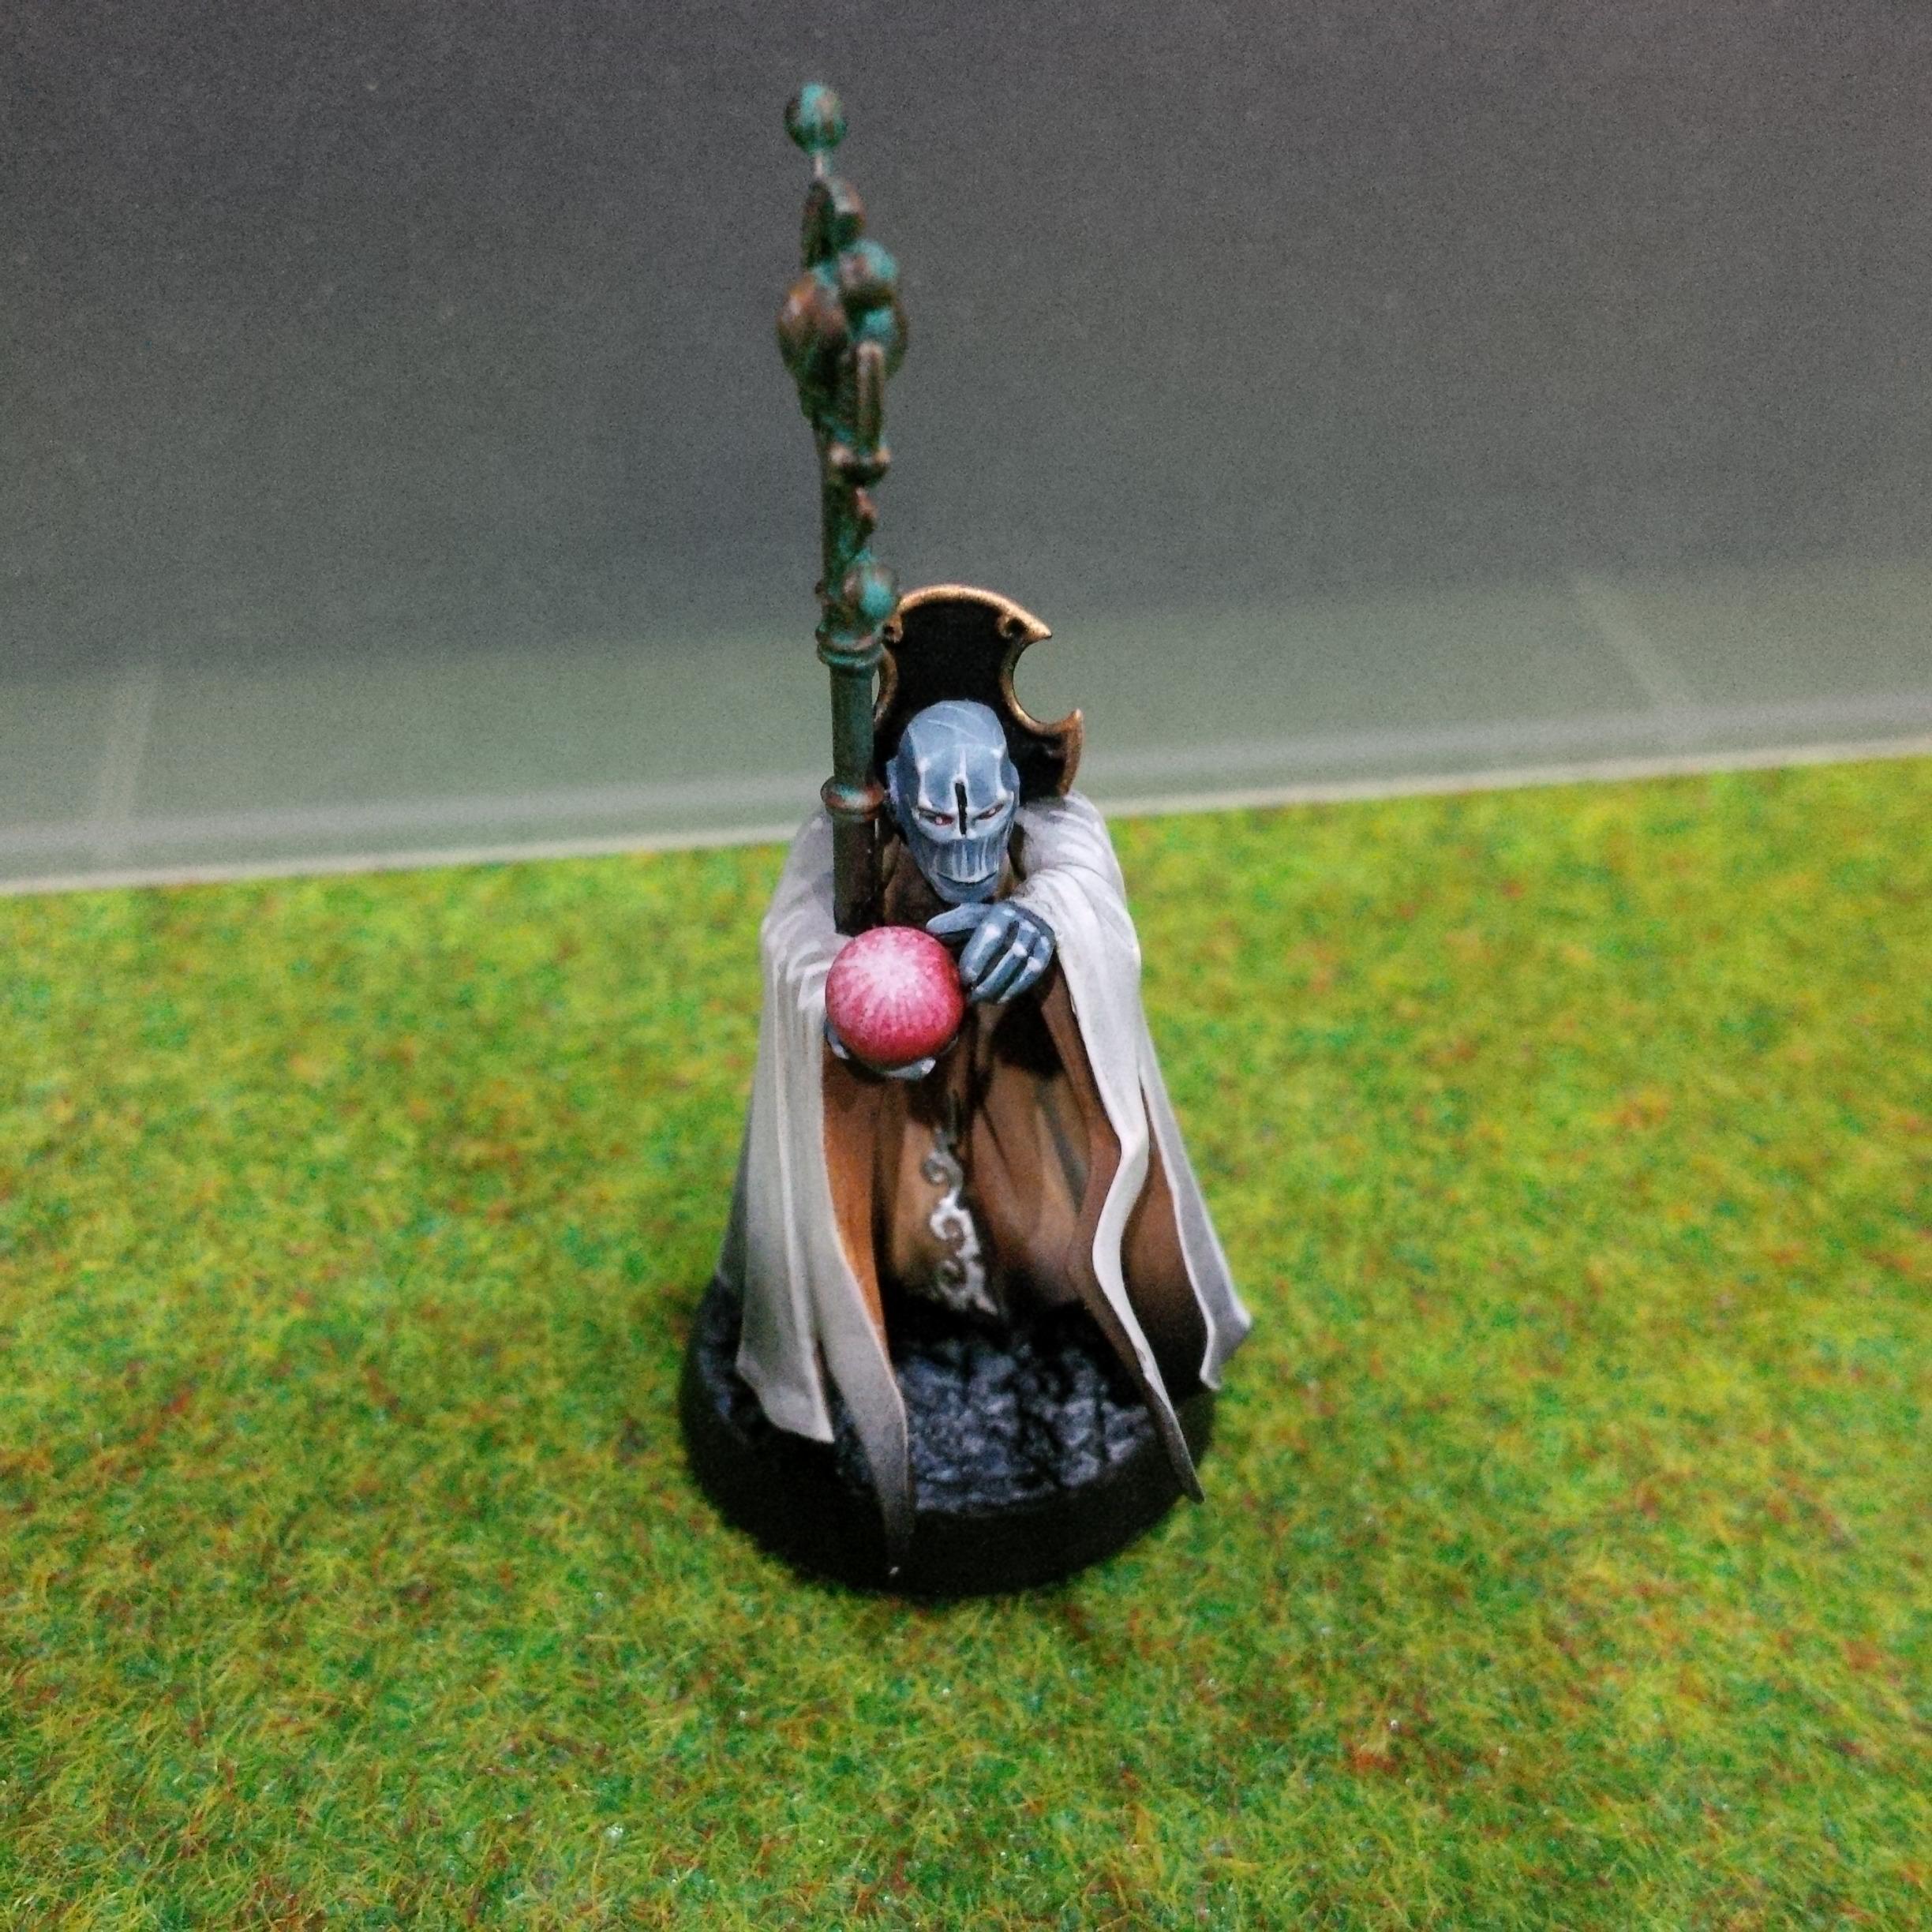 Conversion, Crystal Ball Ethereal, Ethereal, Fantasy Conversion, Tau, Warhammer 40,000, Warhammer Fantasy